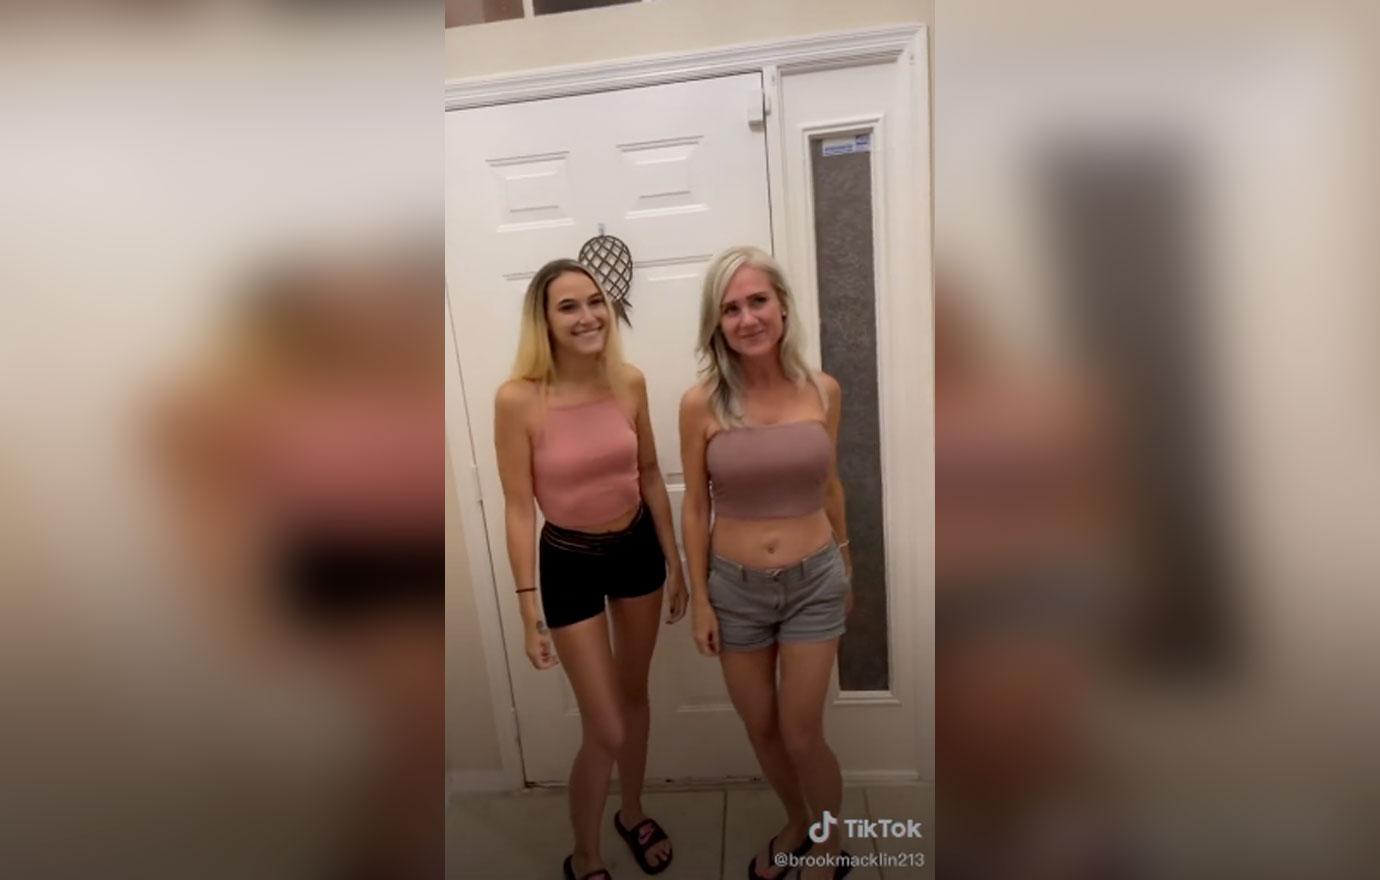 Viral TikTok Swinger Who Shares Her Husband With Her Mom and Sister Blowdries Her Private Parts To Provide Hot Meal picture photo